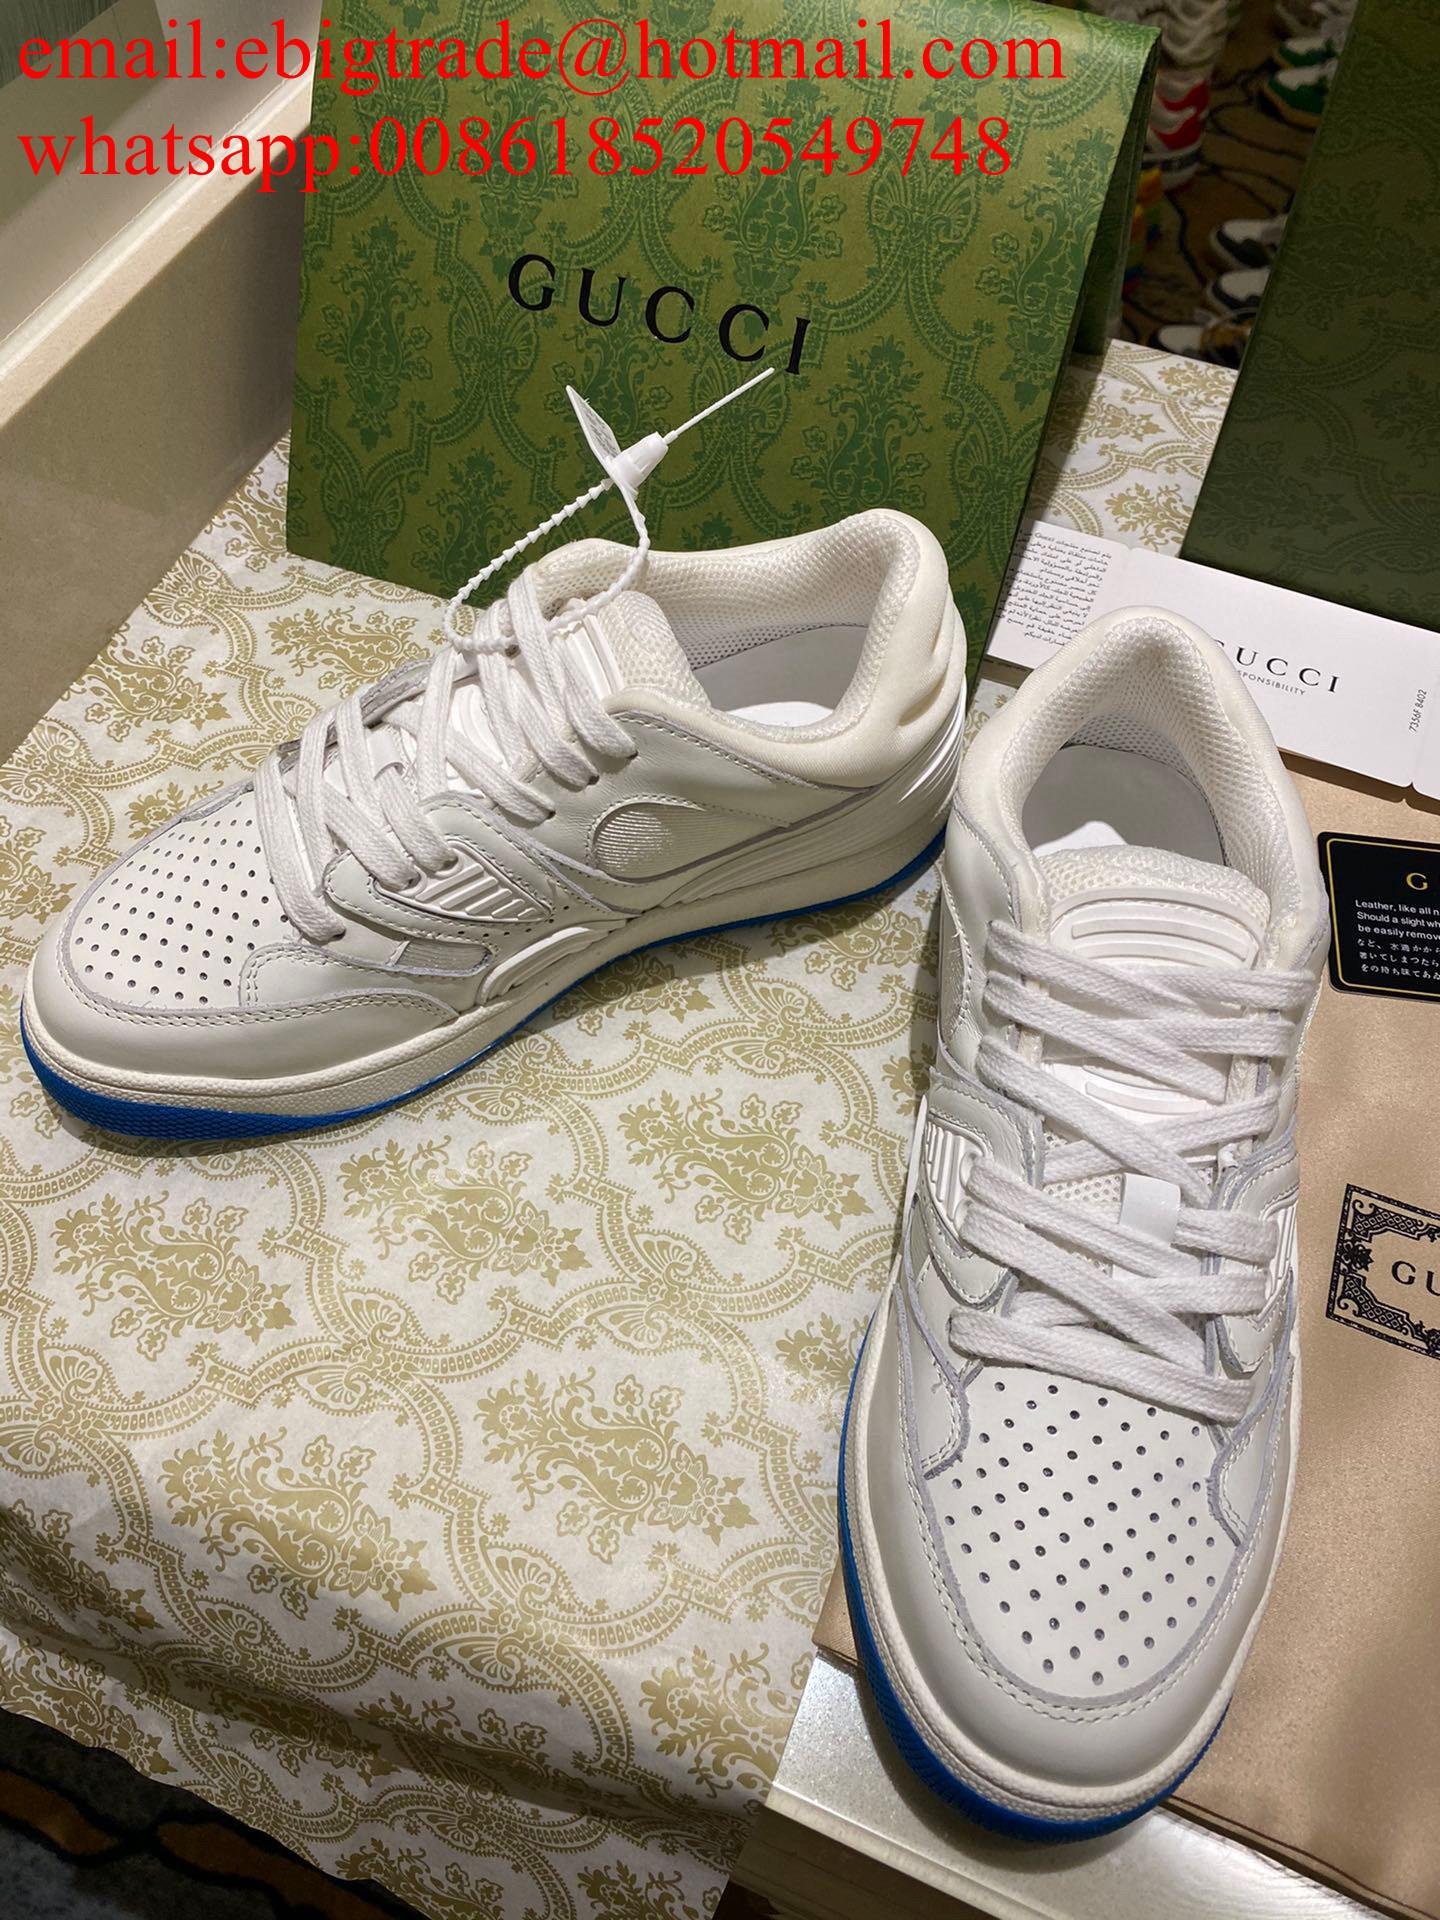 Gucci Basket Sneakers for men